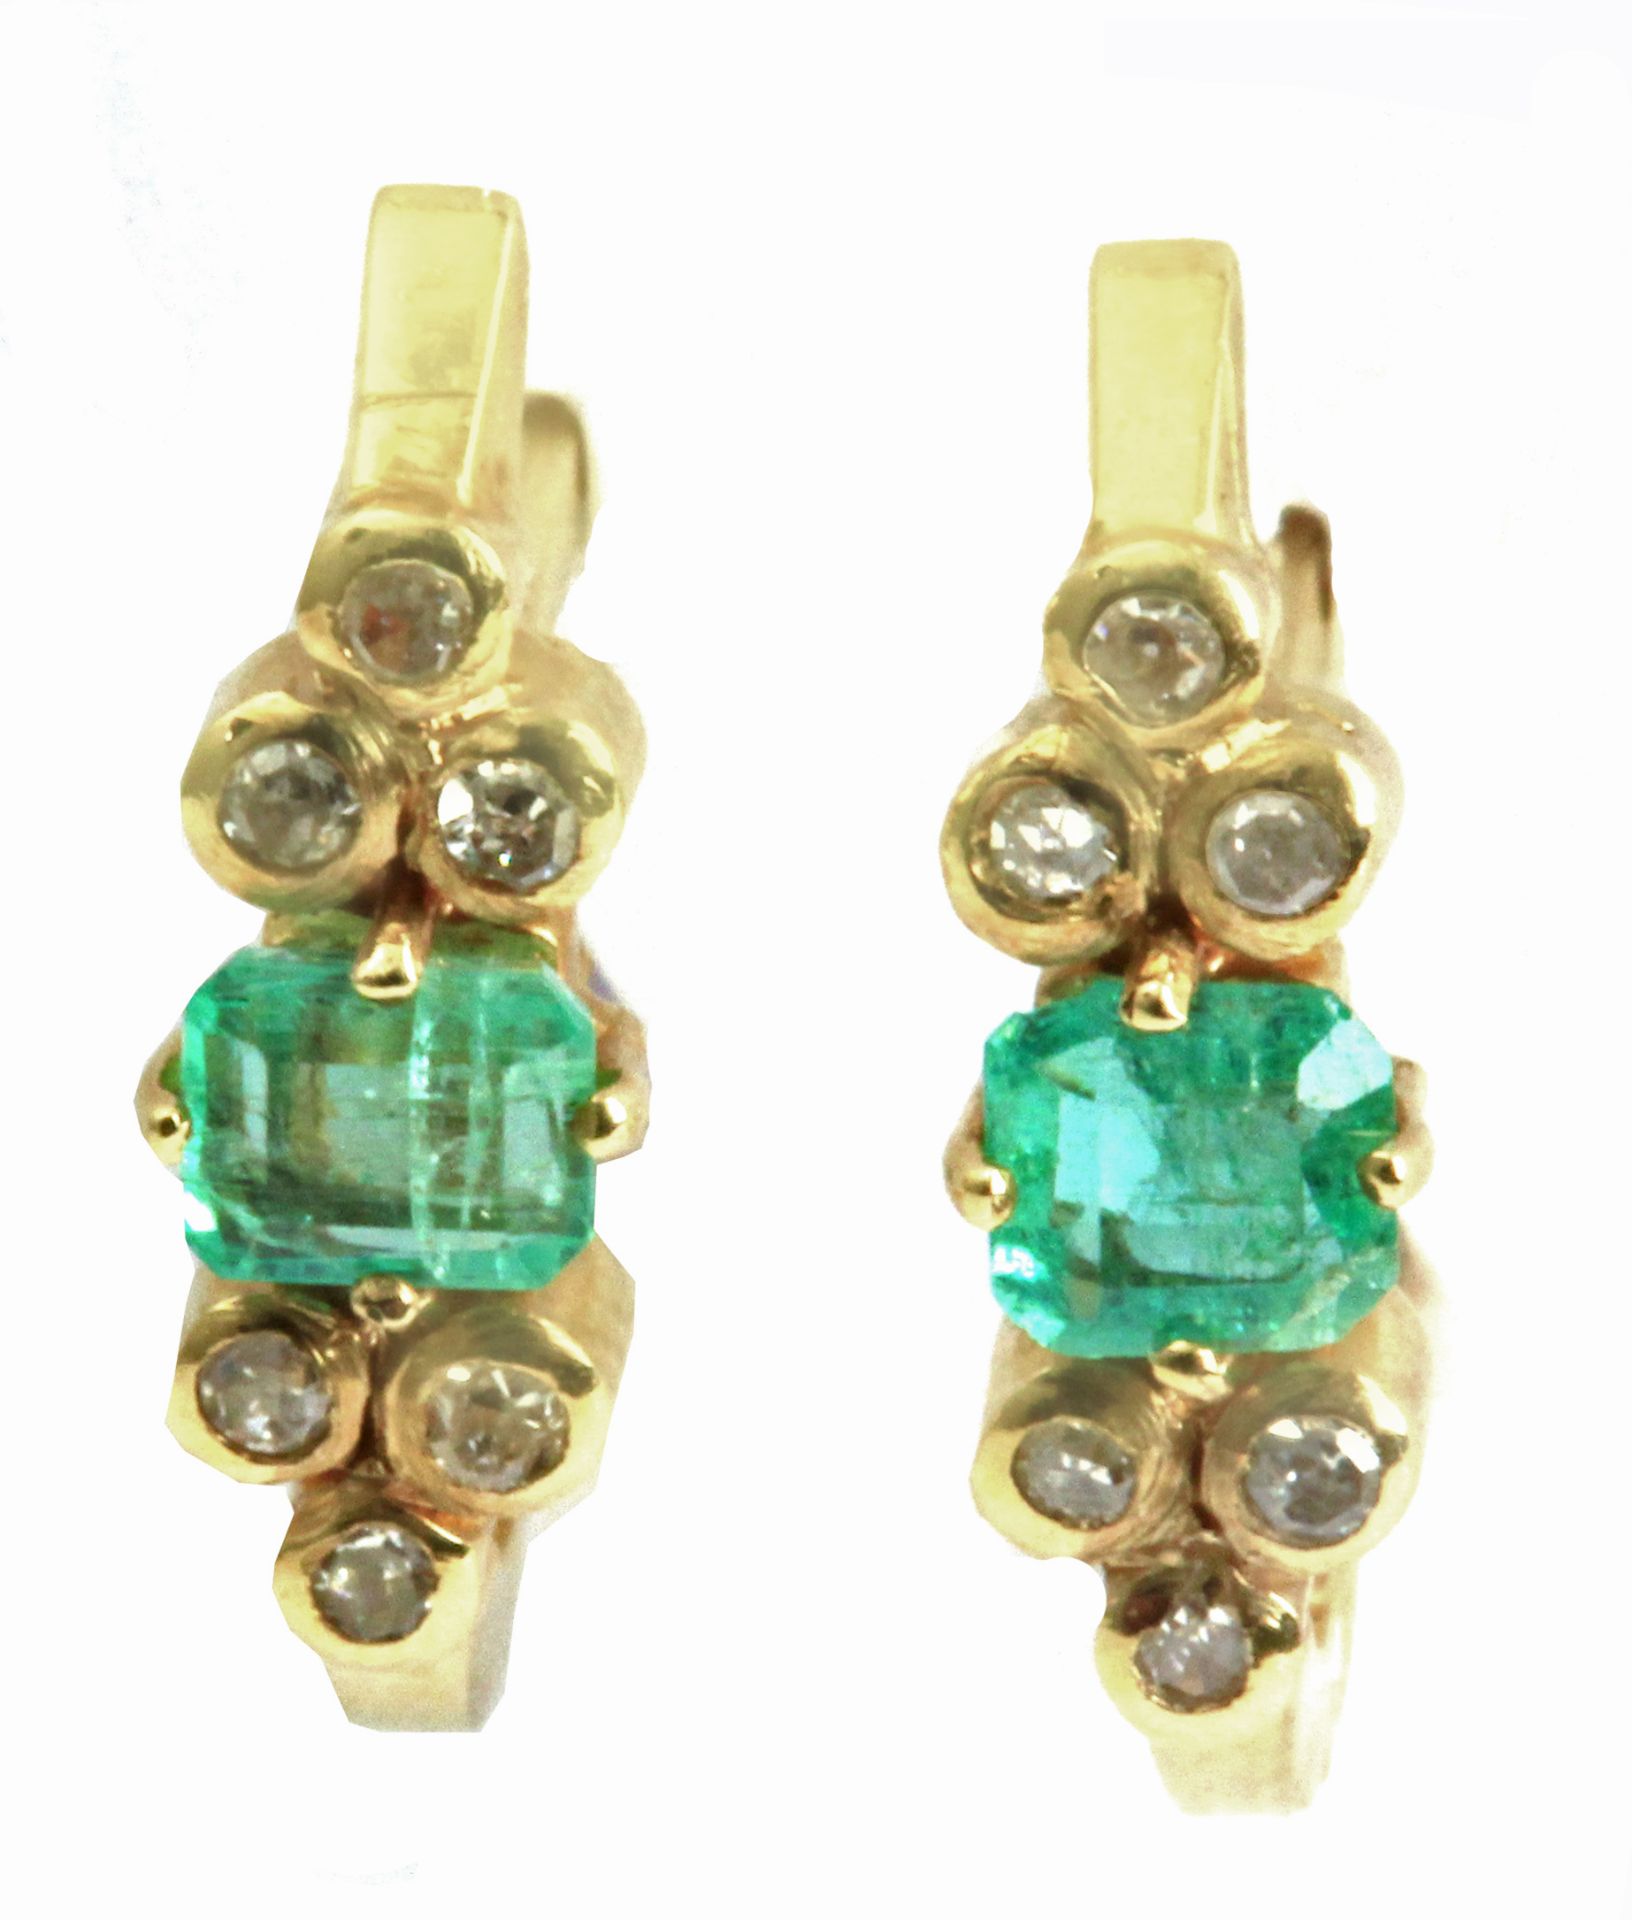 A pair of emerald and diamond earrings with an 18k. yellow gold setting